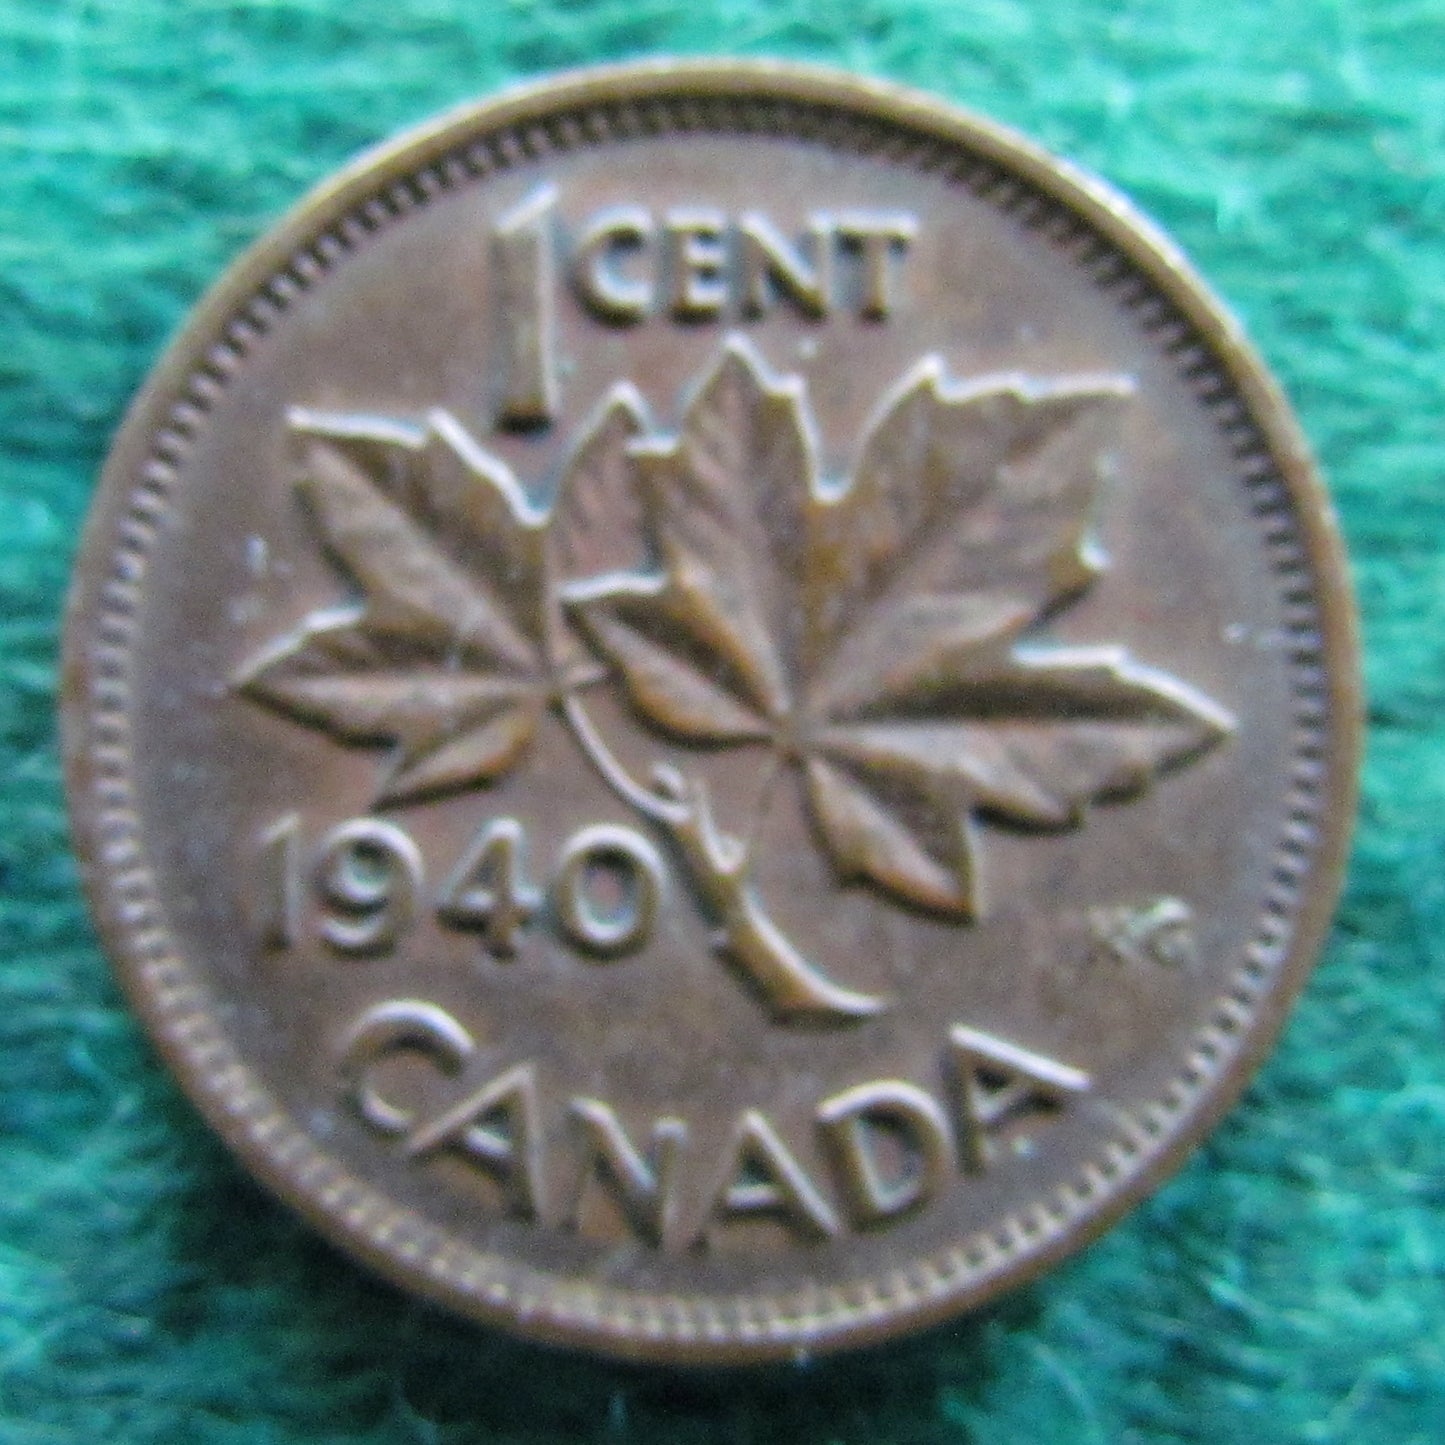 Canada 1940 1 Cent King George VI Coin - Circulated